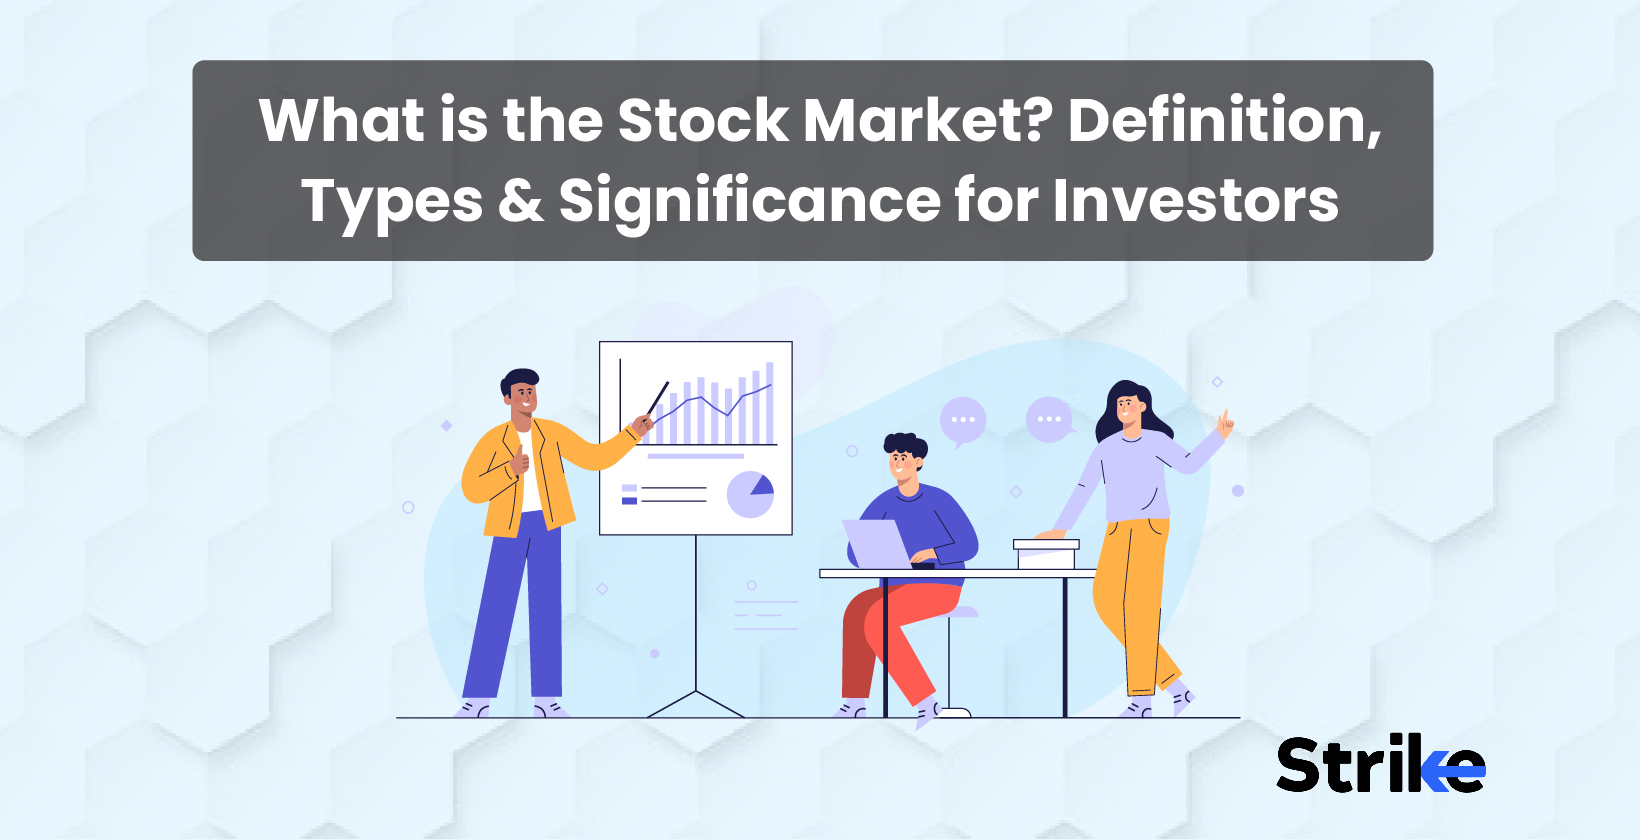 What is stock market?